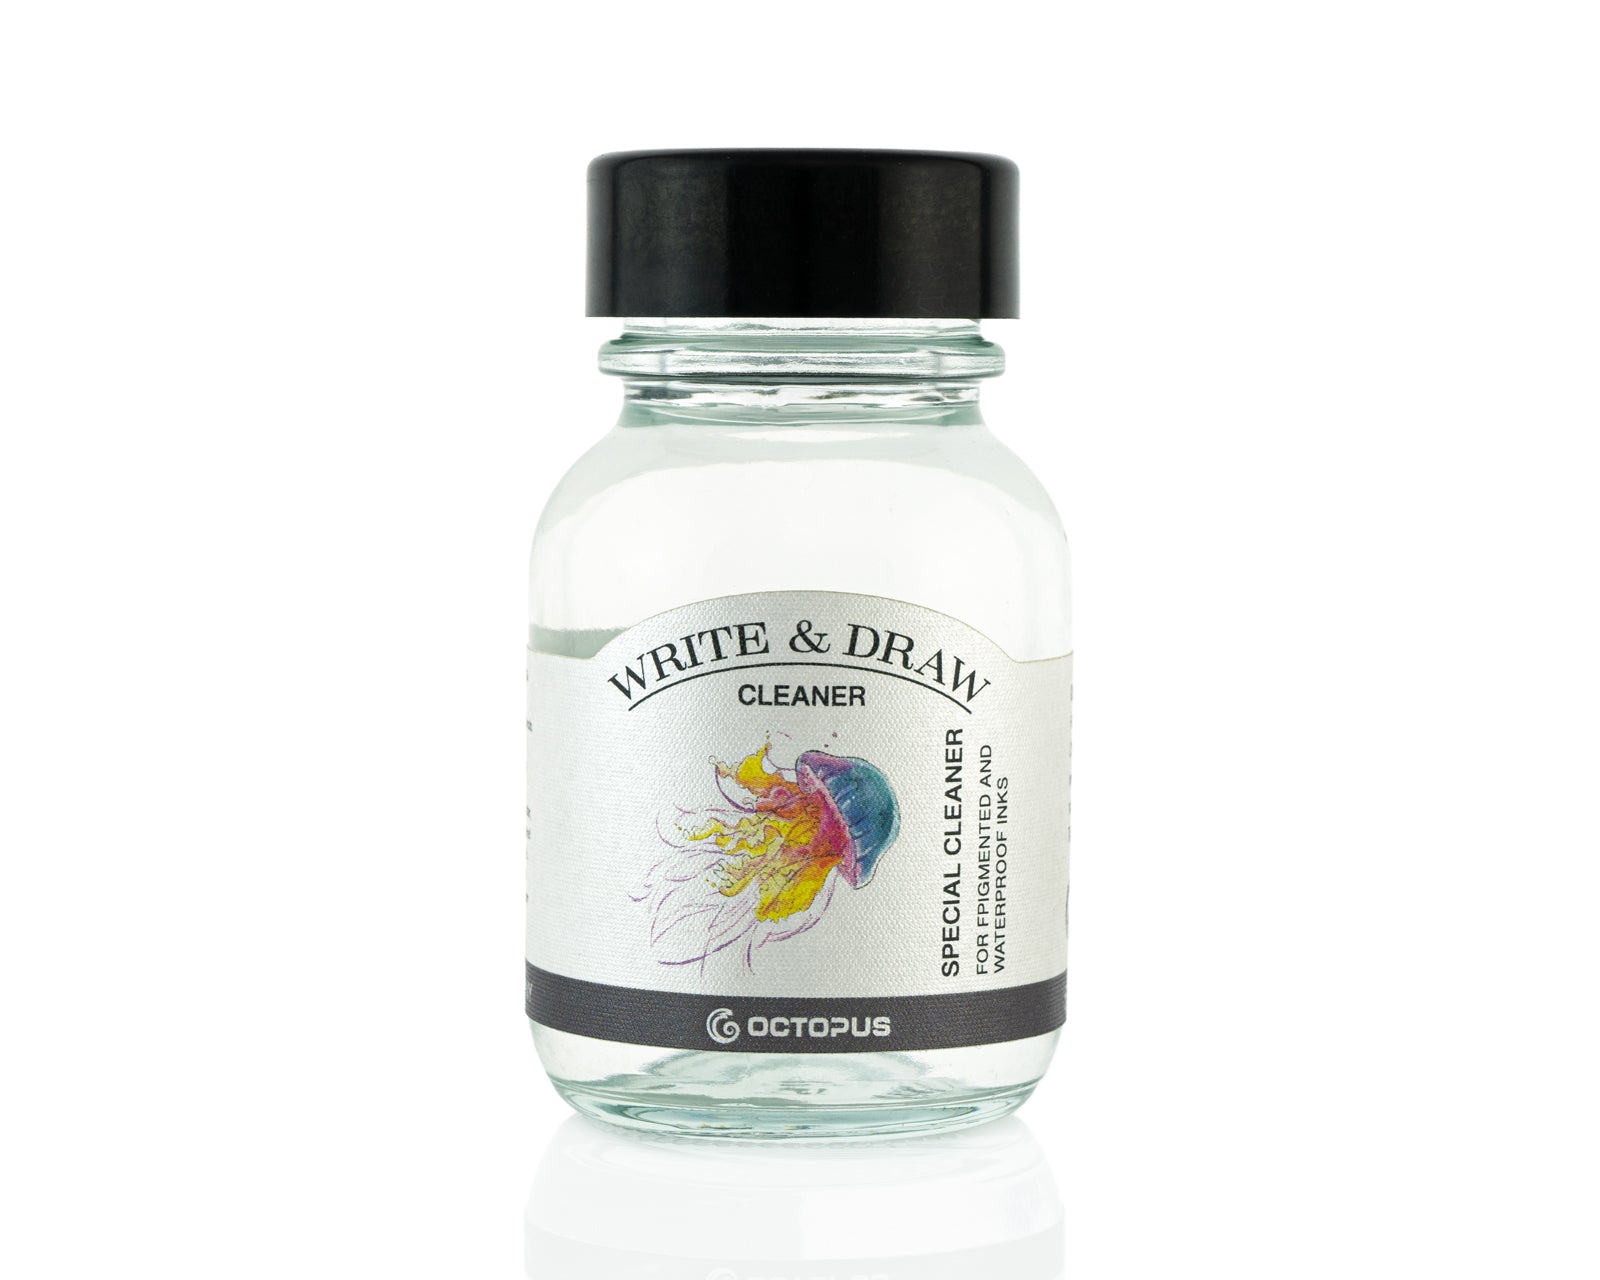 Octopus special cleaner for write and draw inks